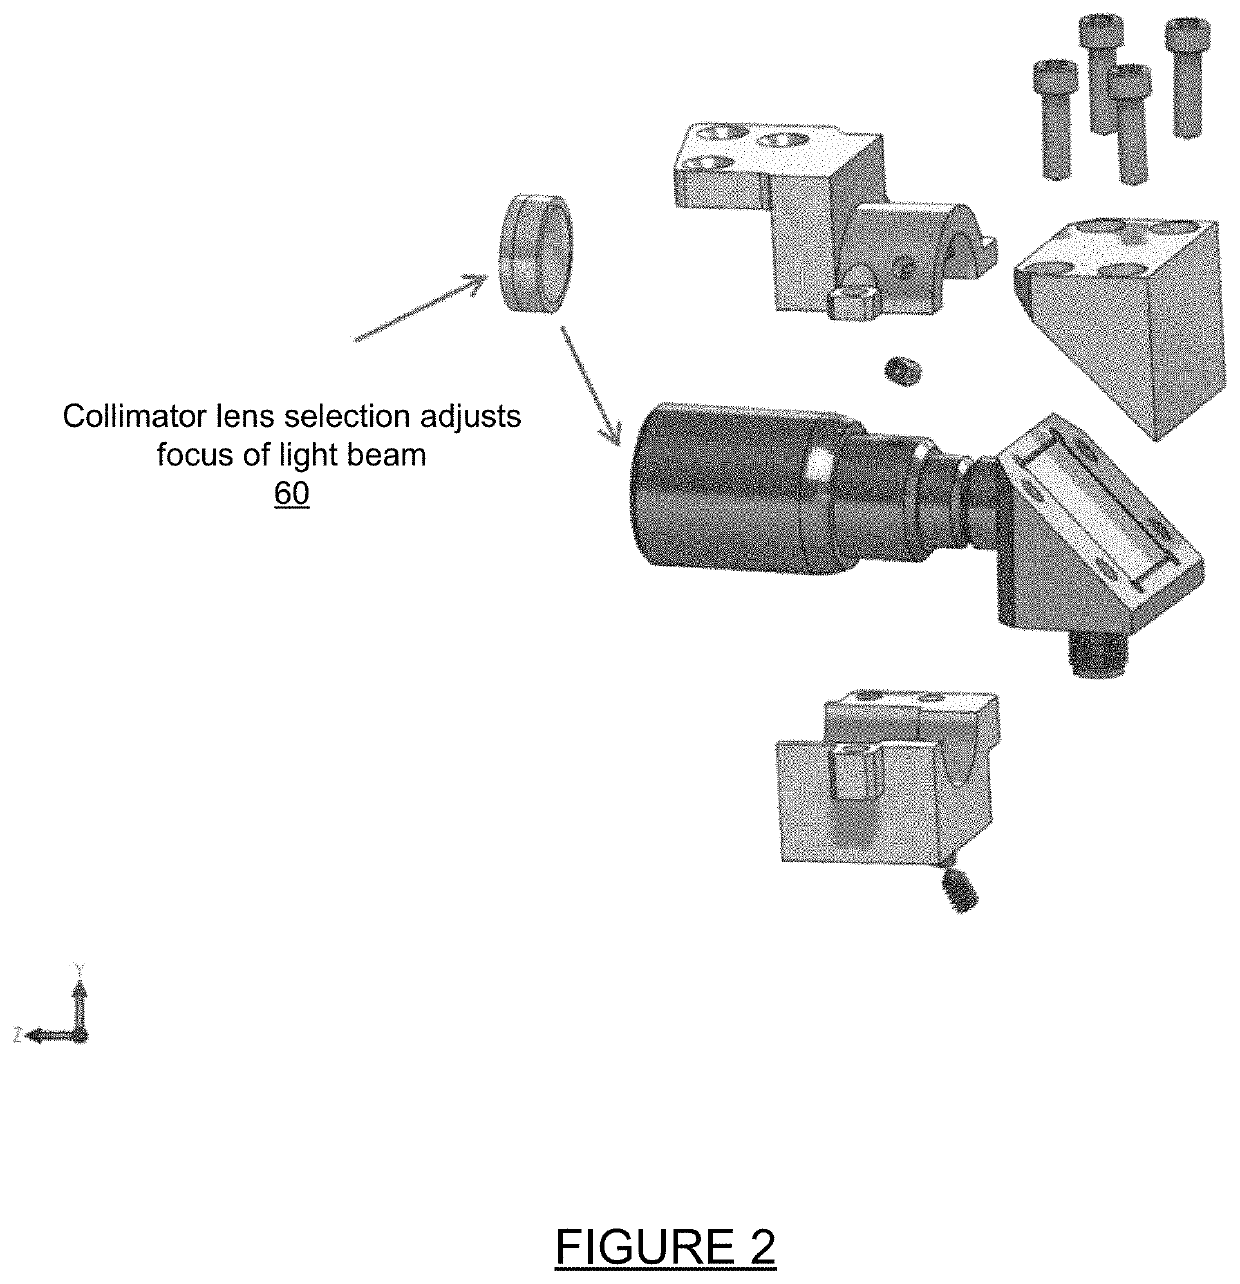 Reduced footprint collimator device to focus light beam over length of optical path